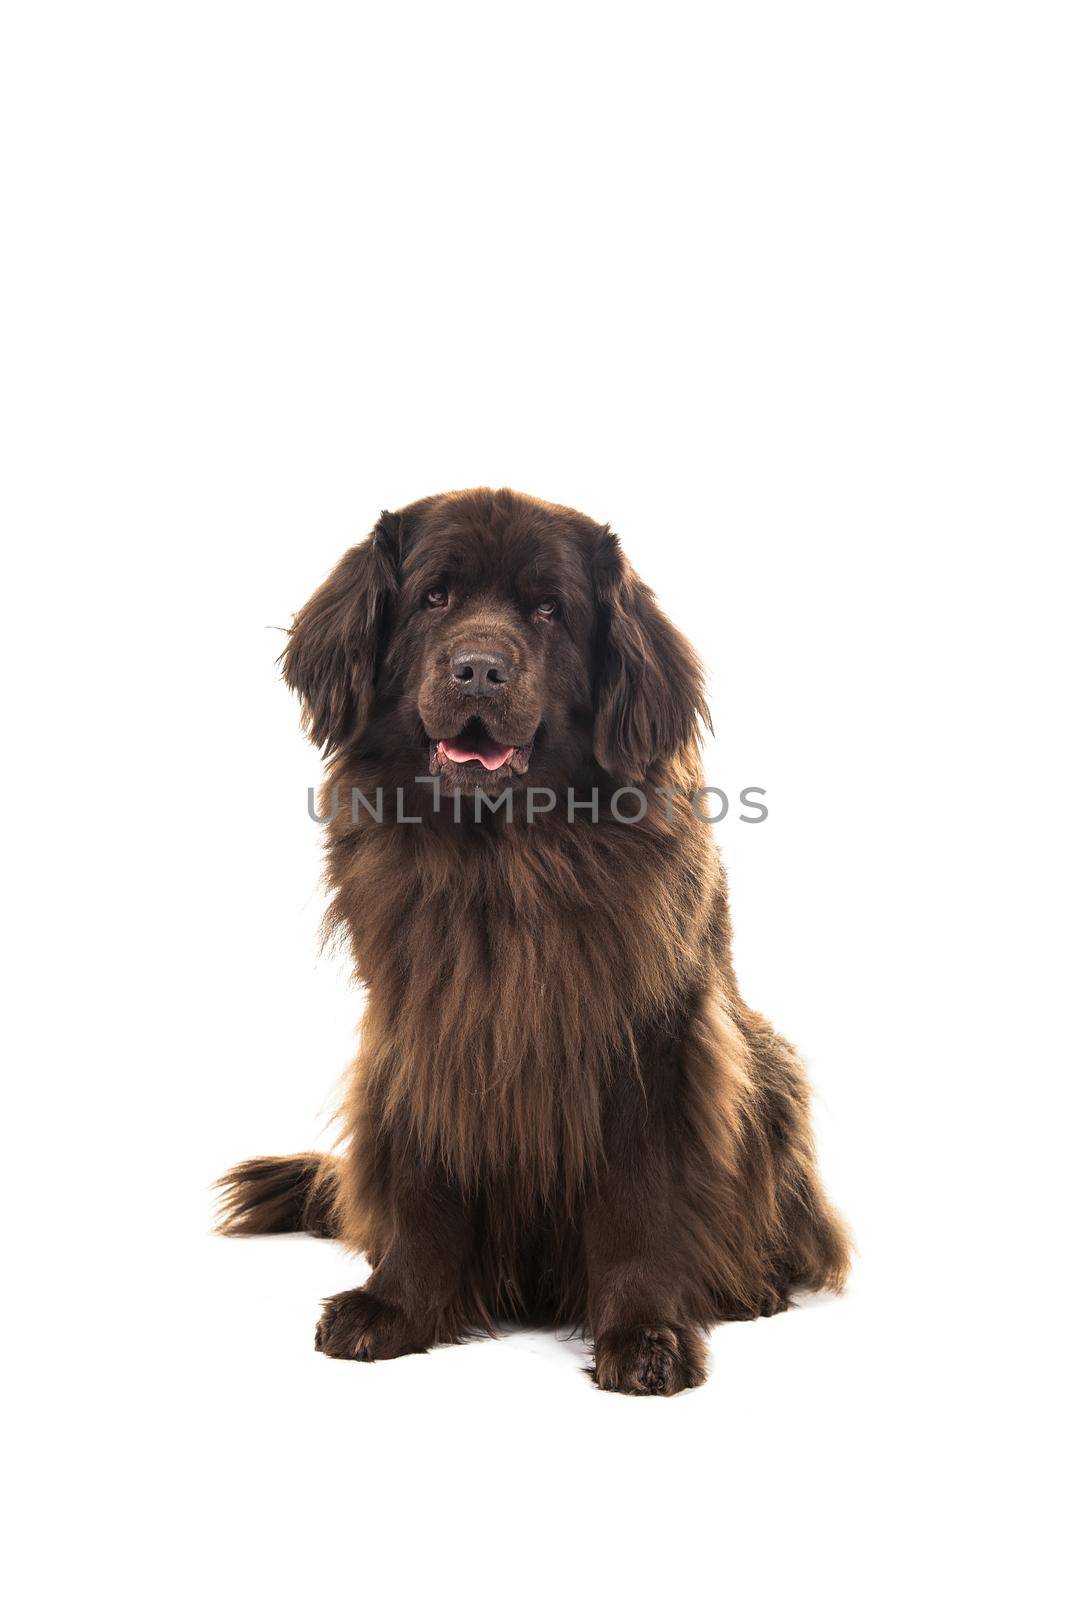 Big brown New Foundland dog sitting looking at the camera isolated on a white background